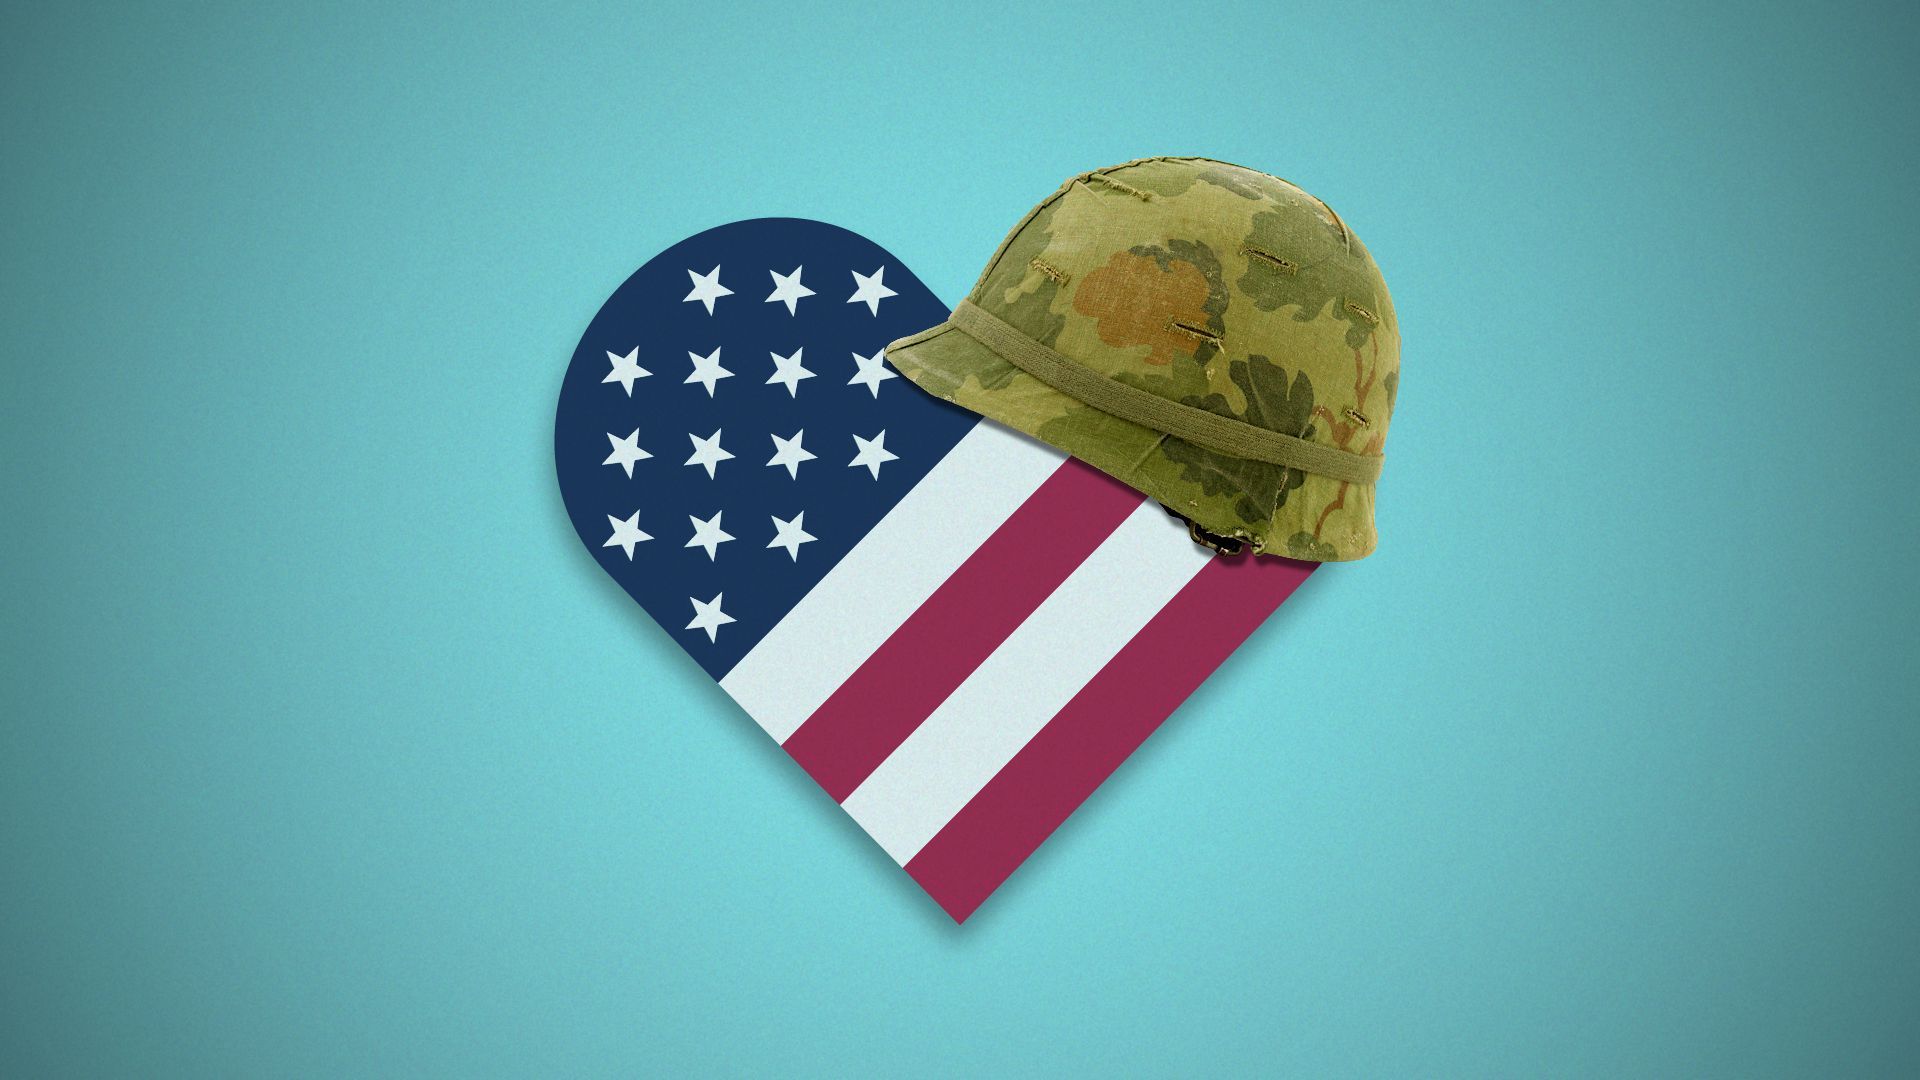 Illustration of a soldier's helmet on an American flag heart.